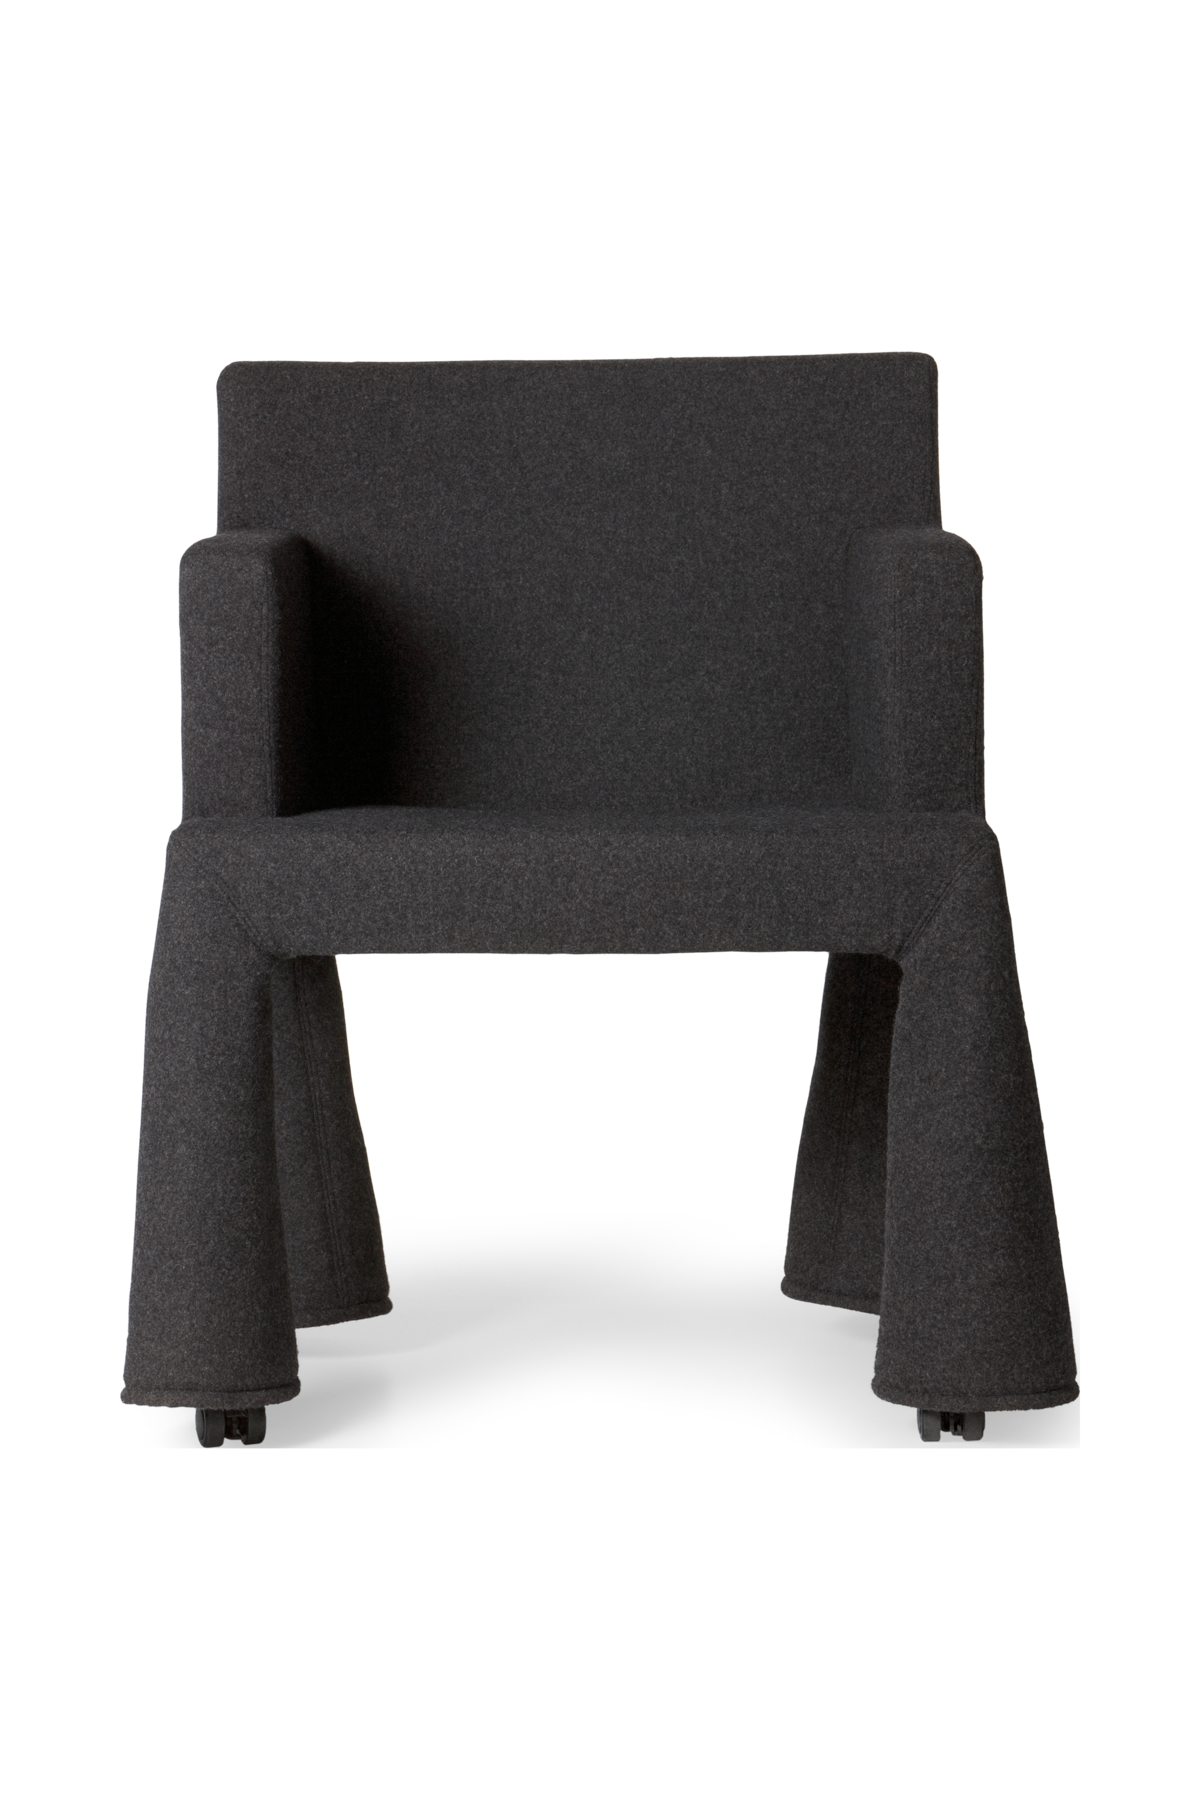 VIP-Chair-Front-Black